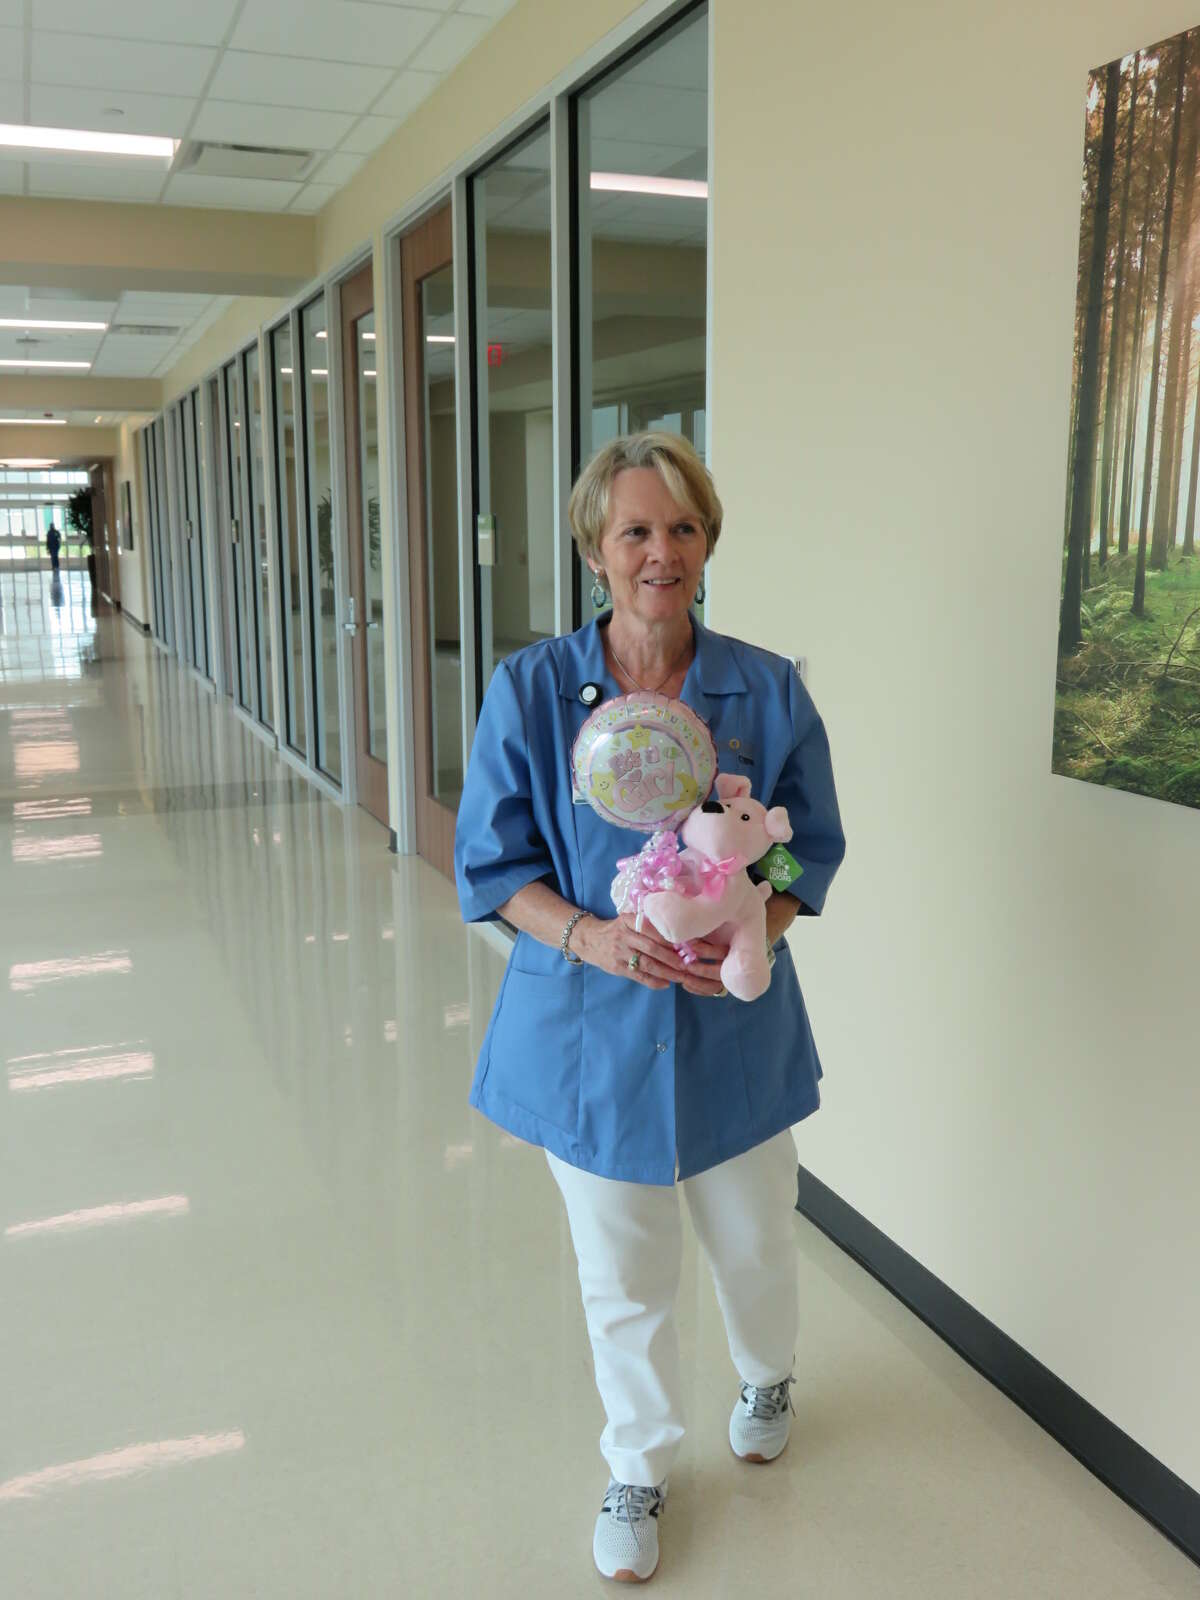 Volunteer Emiley Jarvis delivers a gift to a patient at the Memorial Hermann Cypress Hospital. Officials at the recently opened hospital are seeking volunteers who are interested in helping out at the $168 million facility. Currently, the hospitalâs program includes 45 active volunteers. Positions are open to those who are retired, community members in the workforce, and college students.